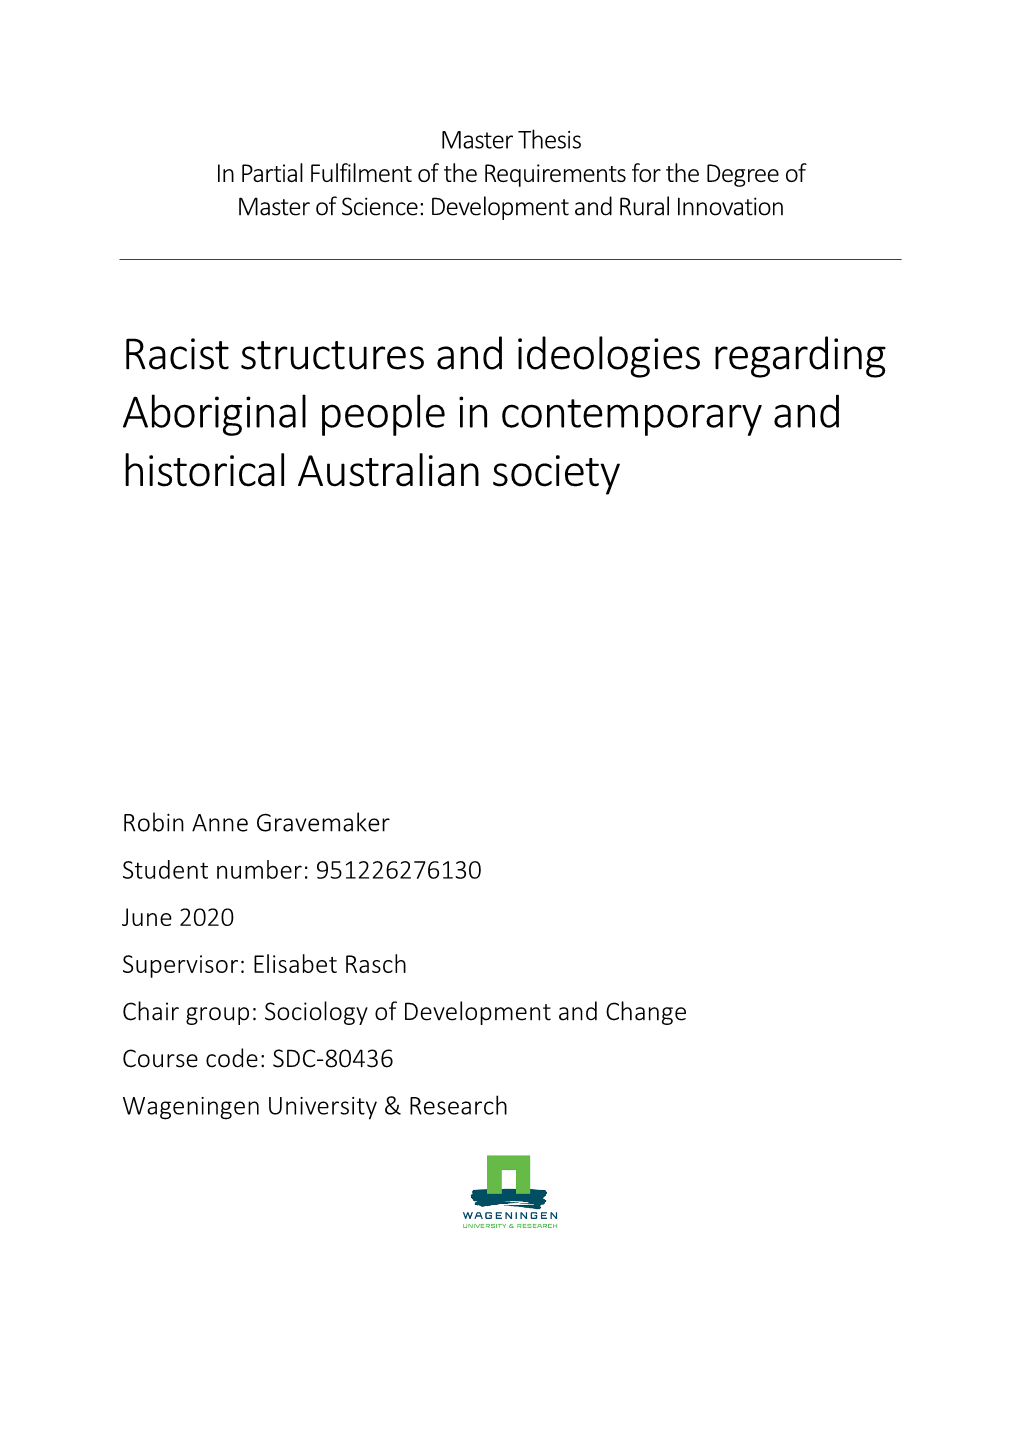 Racist Structures and Ideologies Regarding Aboriginal People in Contemporary and Historical Australian Society